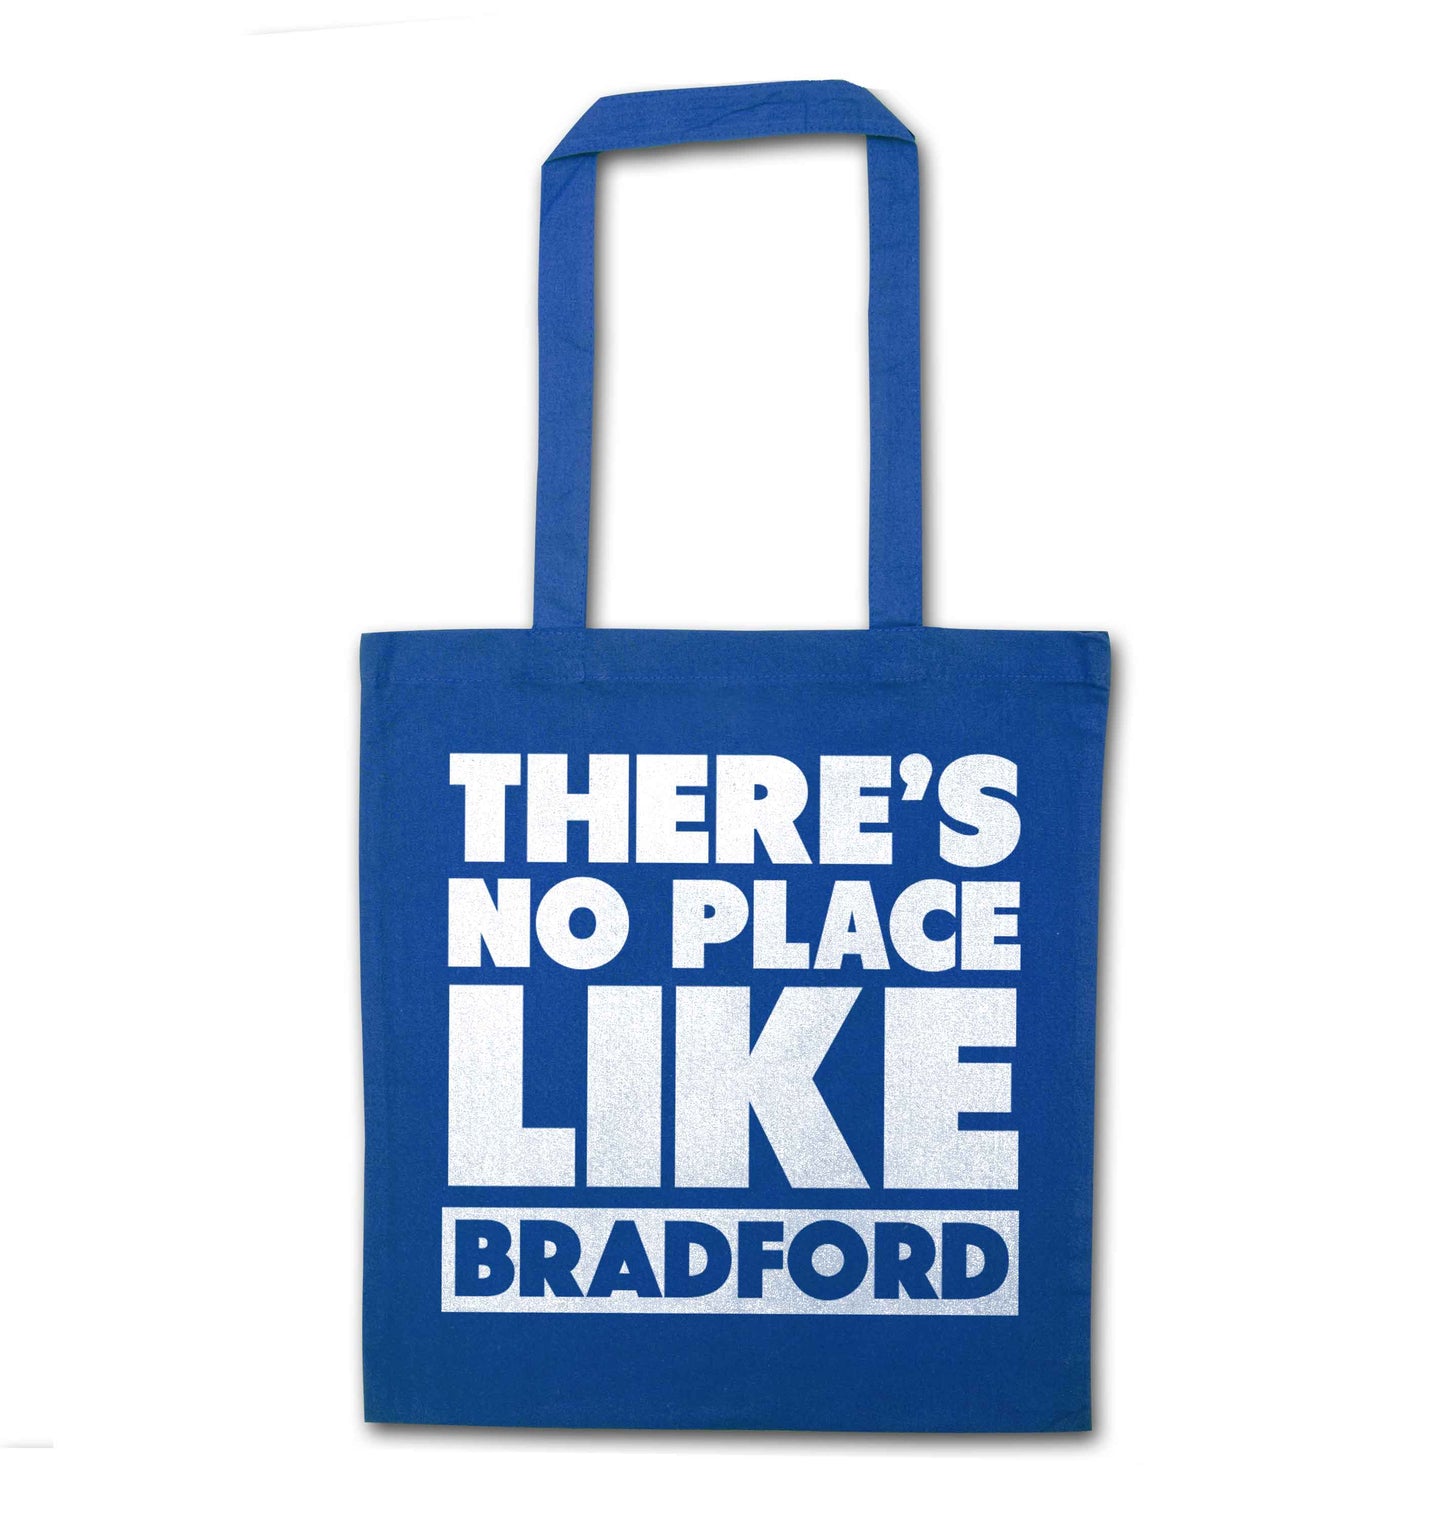 There's no place like Bradford blue tote bag